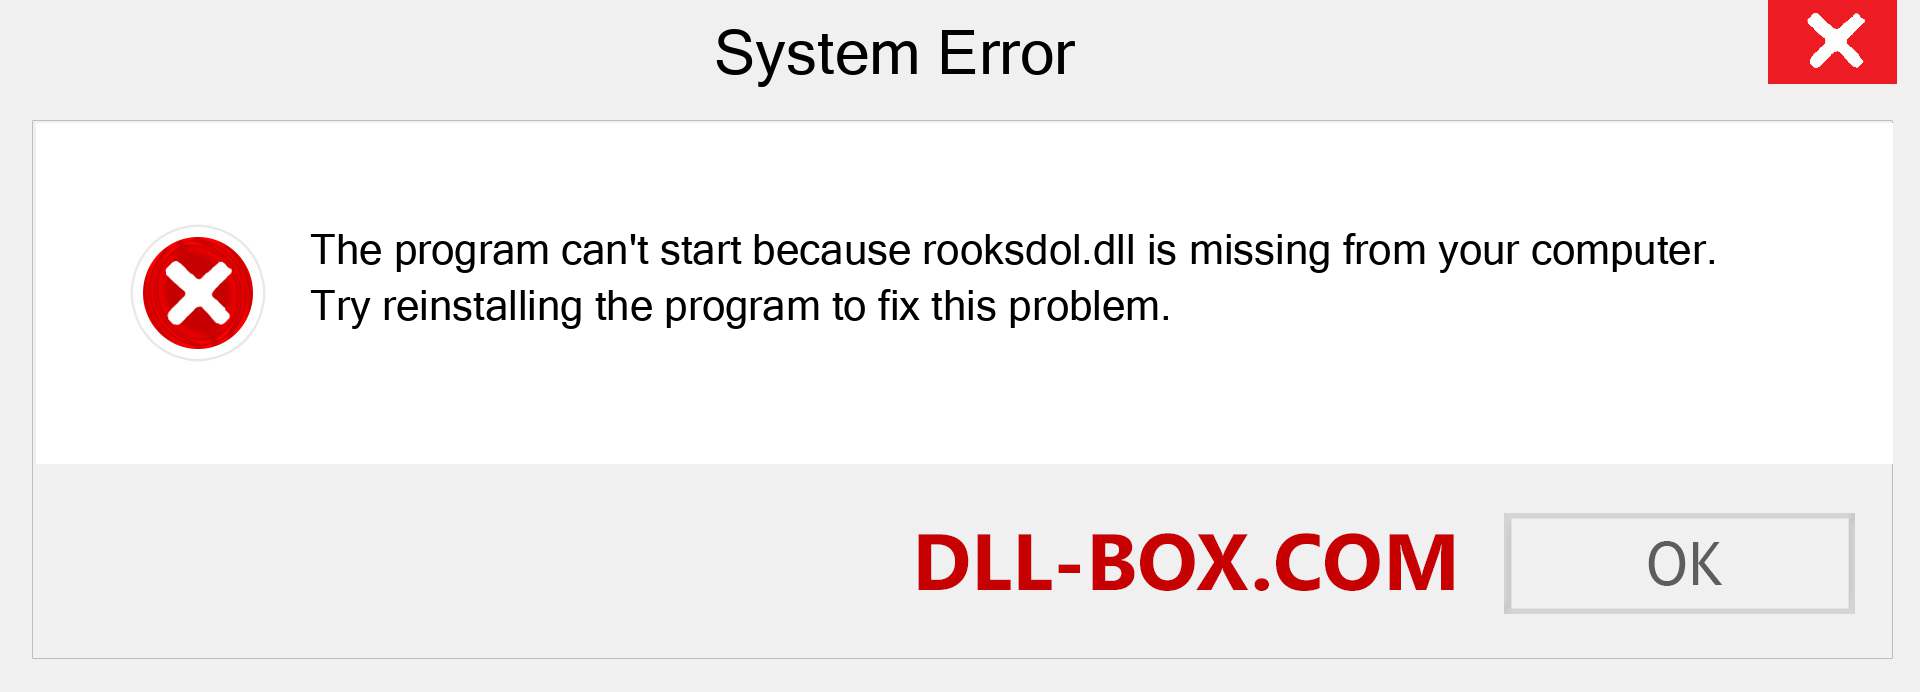  rooksdol.dll file is missing?. Download for Windows 7, 8, 10 - Fix  rooksdol dll Missing Error on Windows, photos, images